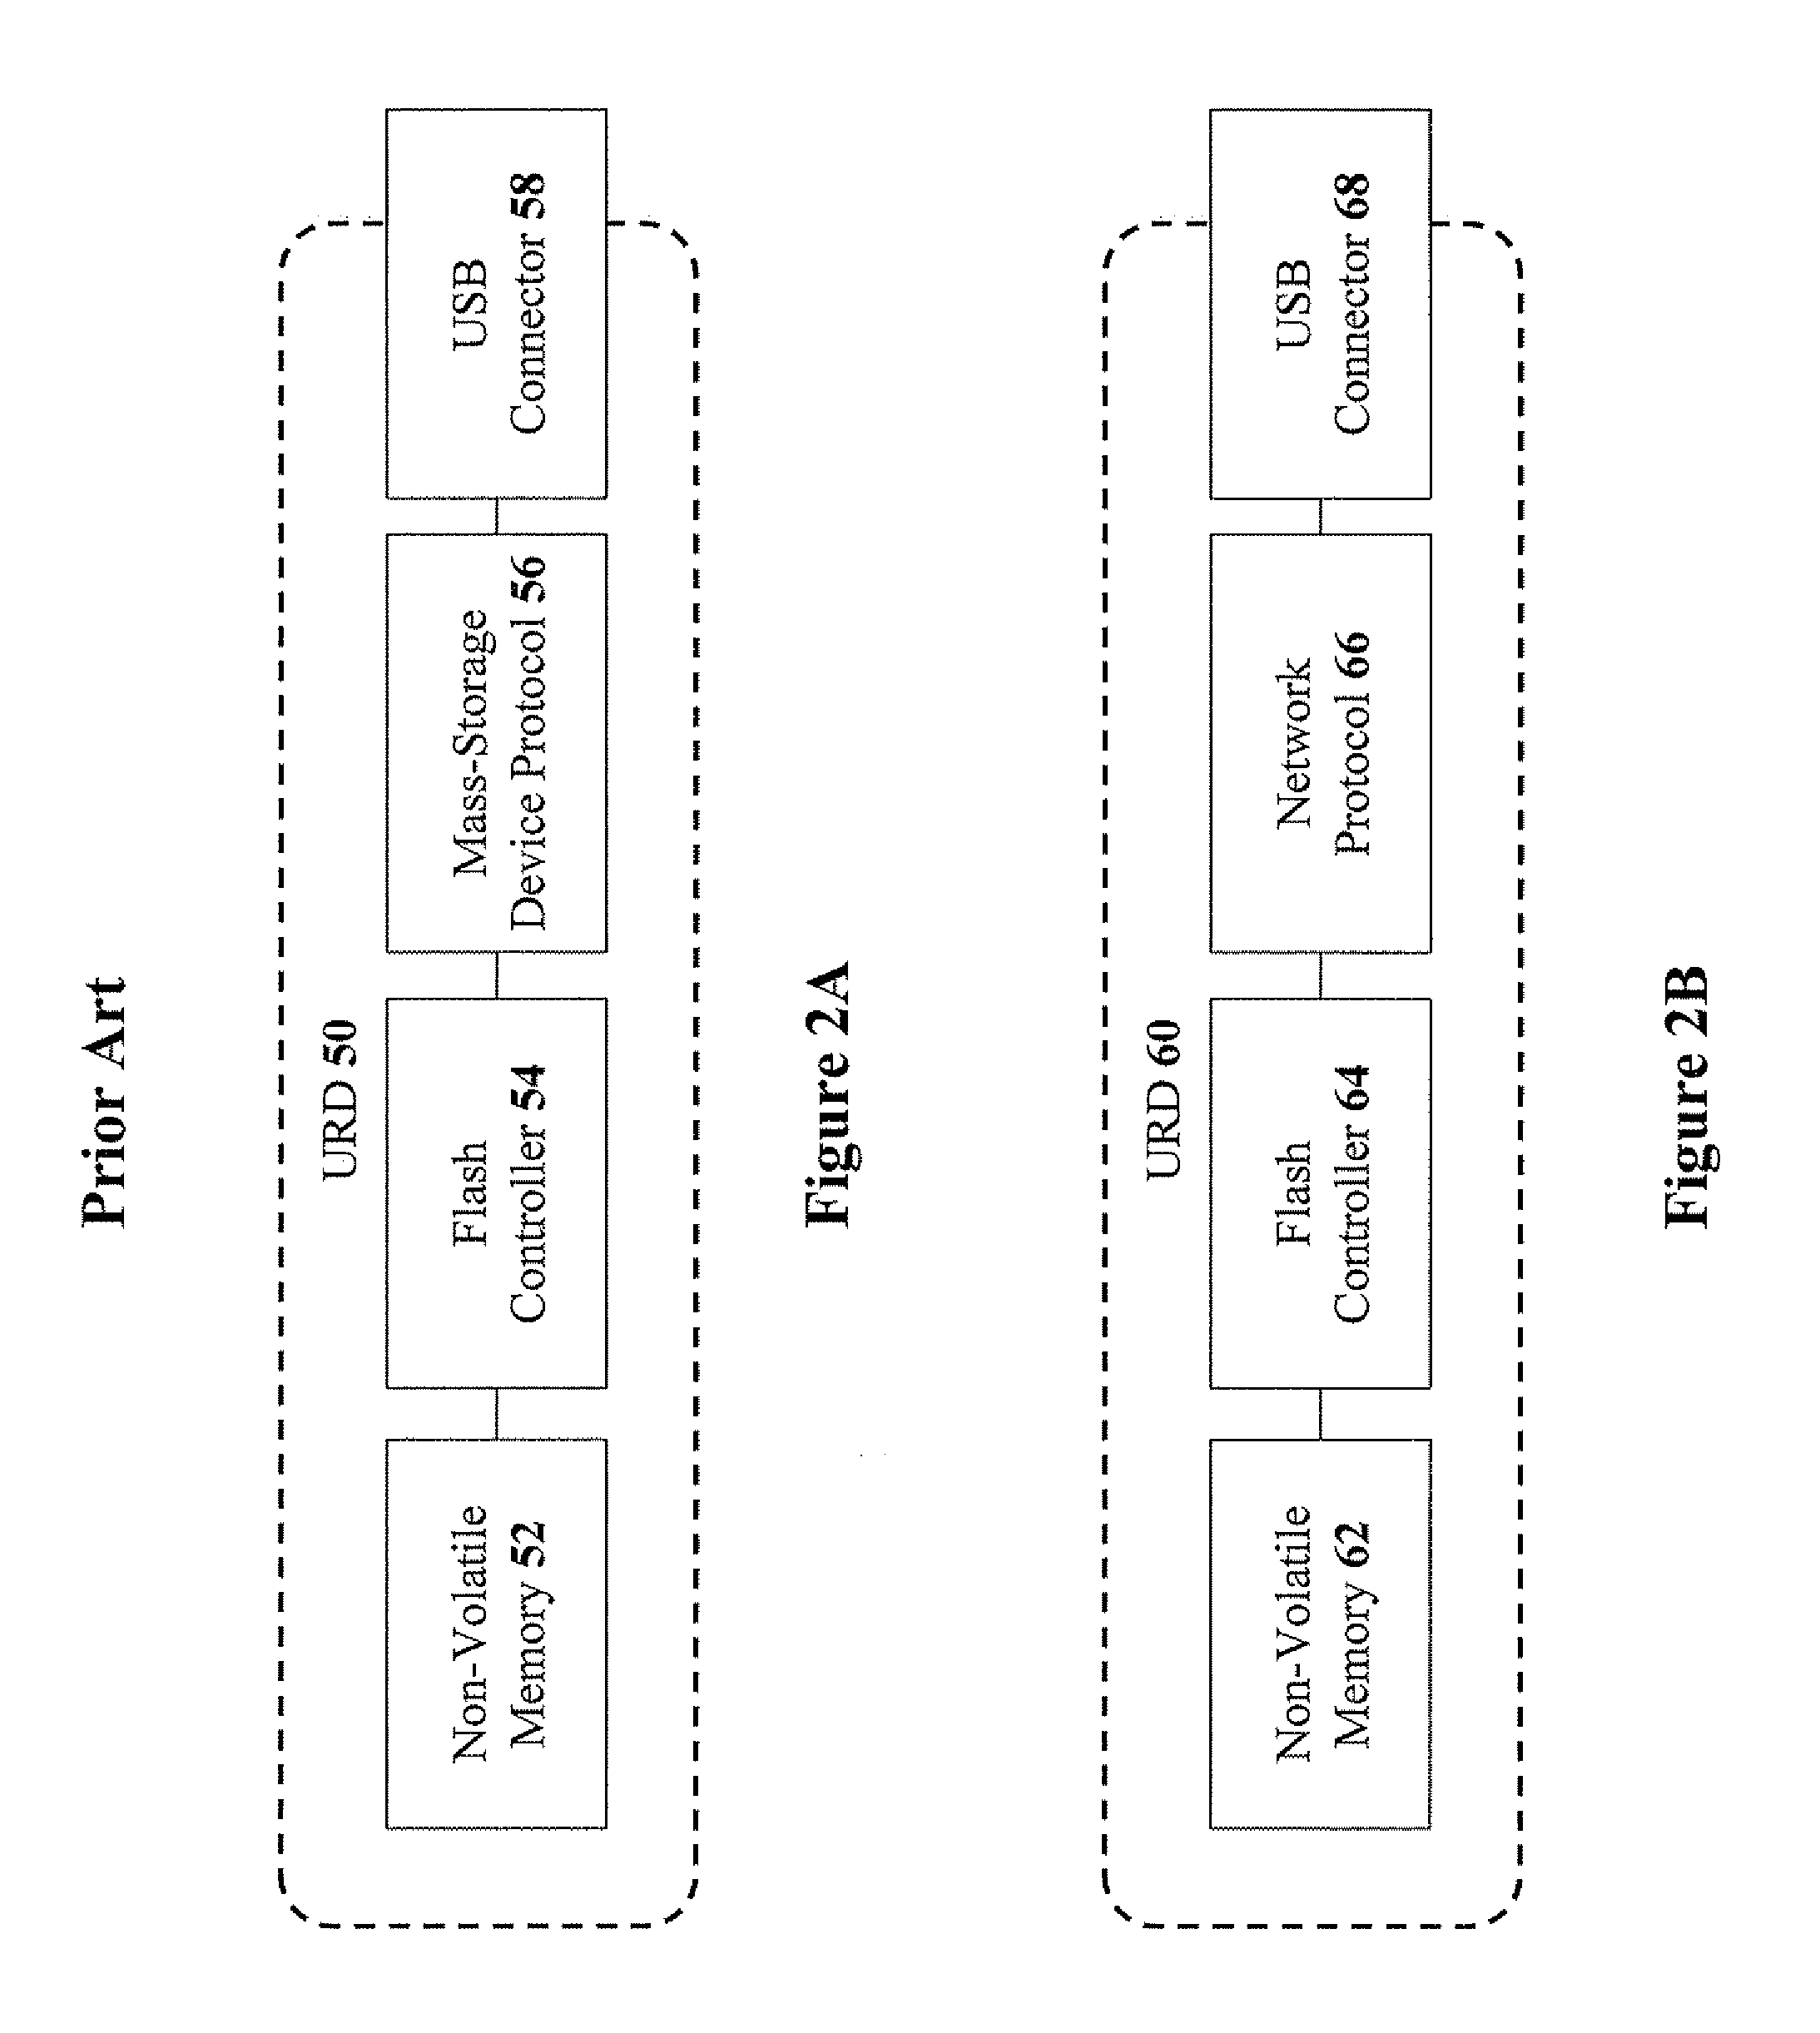 Methods for firewall protection of mass-storage devices